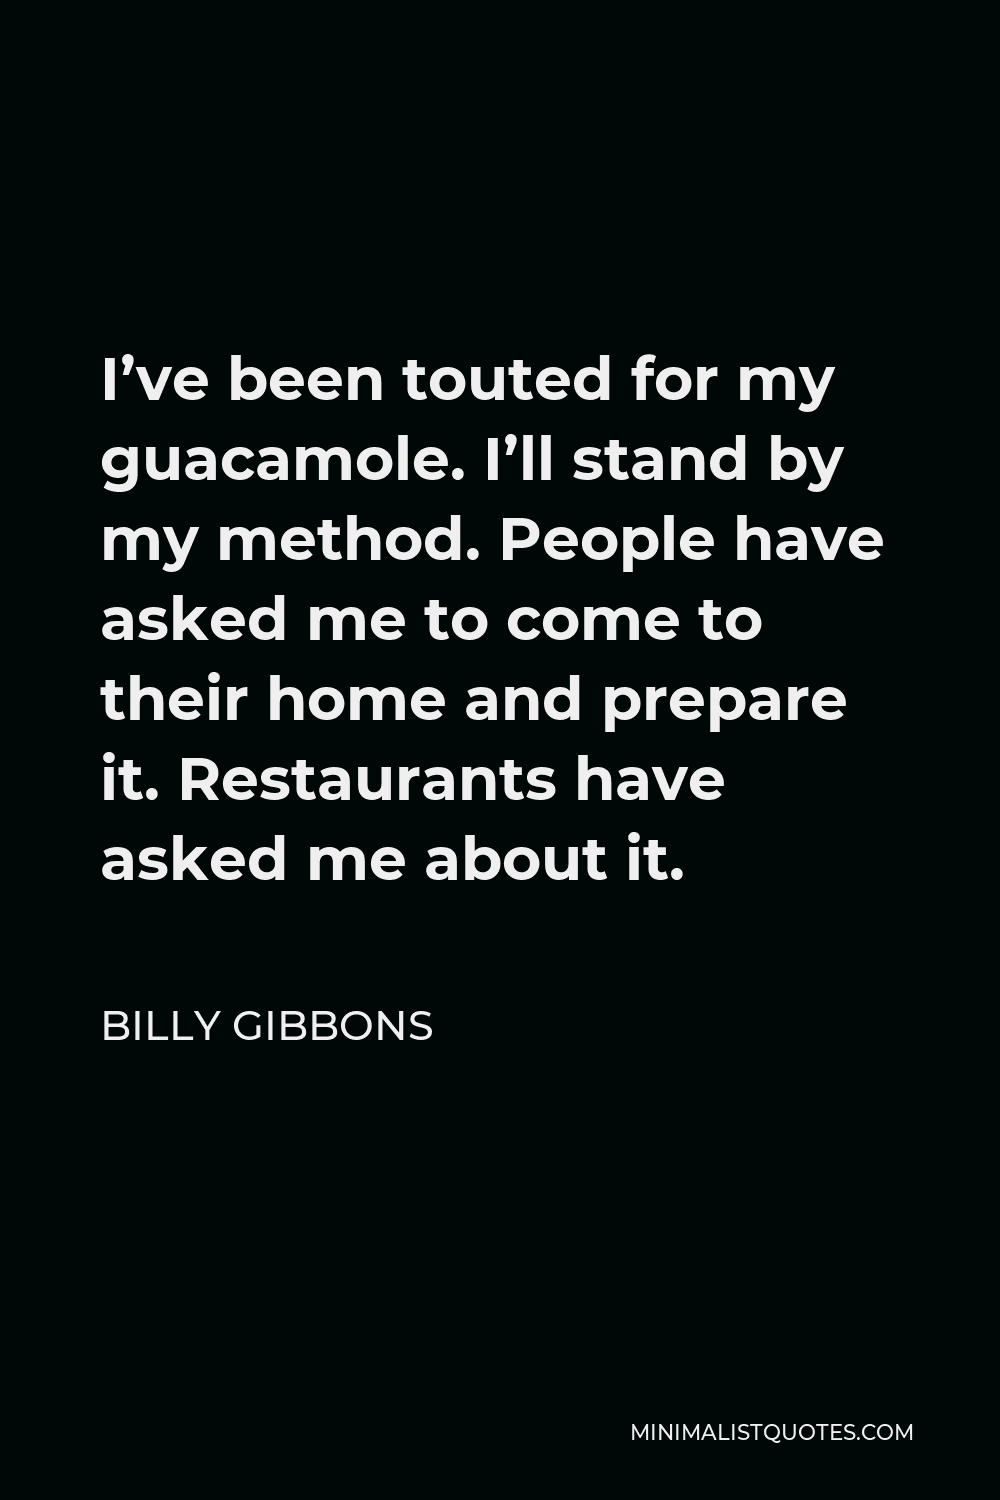 Billy Gibbons Quote - I’ve been touted for my guacamole. I’ll stand by my method. People have asked me to come to their home and prepare it. Restaurants have asked me about it.